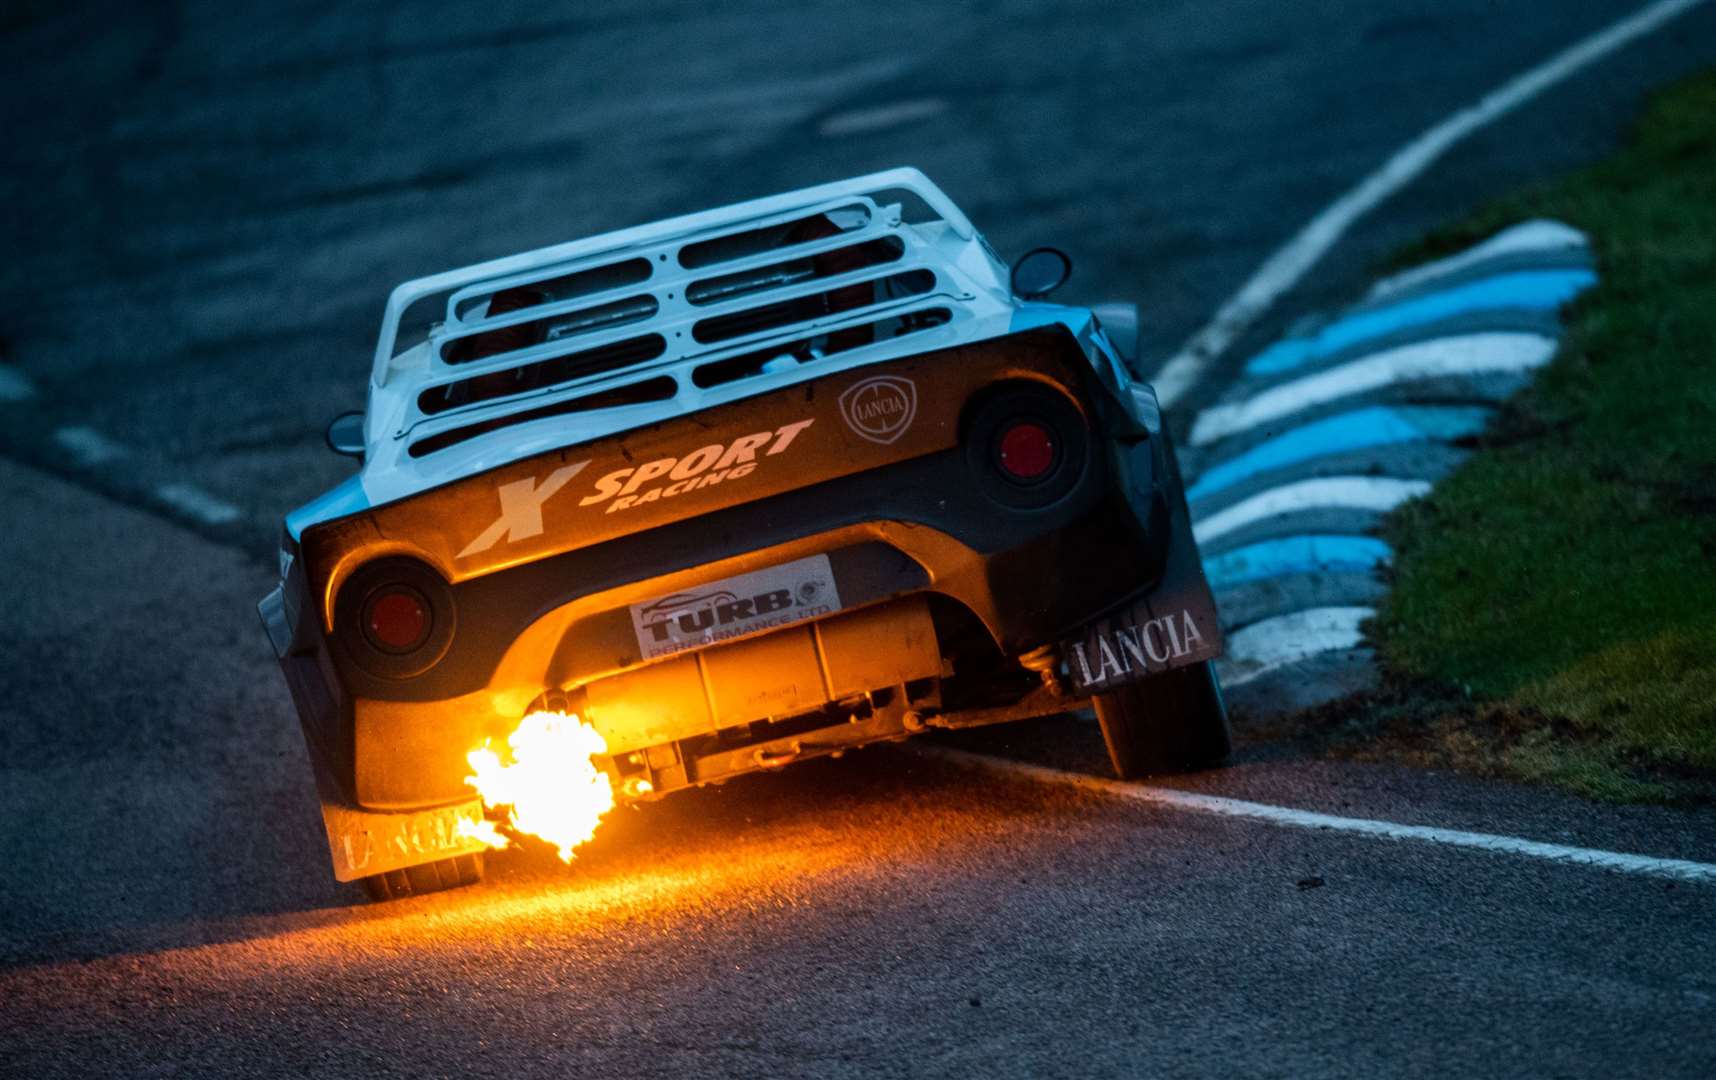 John Cross will be in action in his flame-spitting VW-powered Lancia Stratos